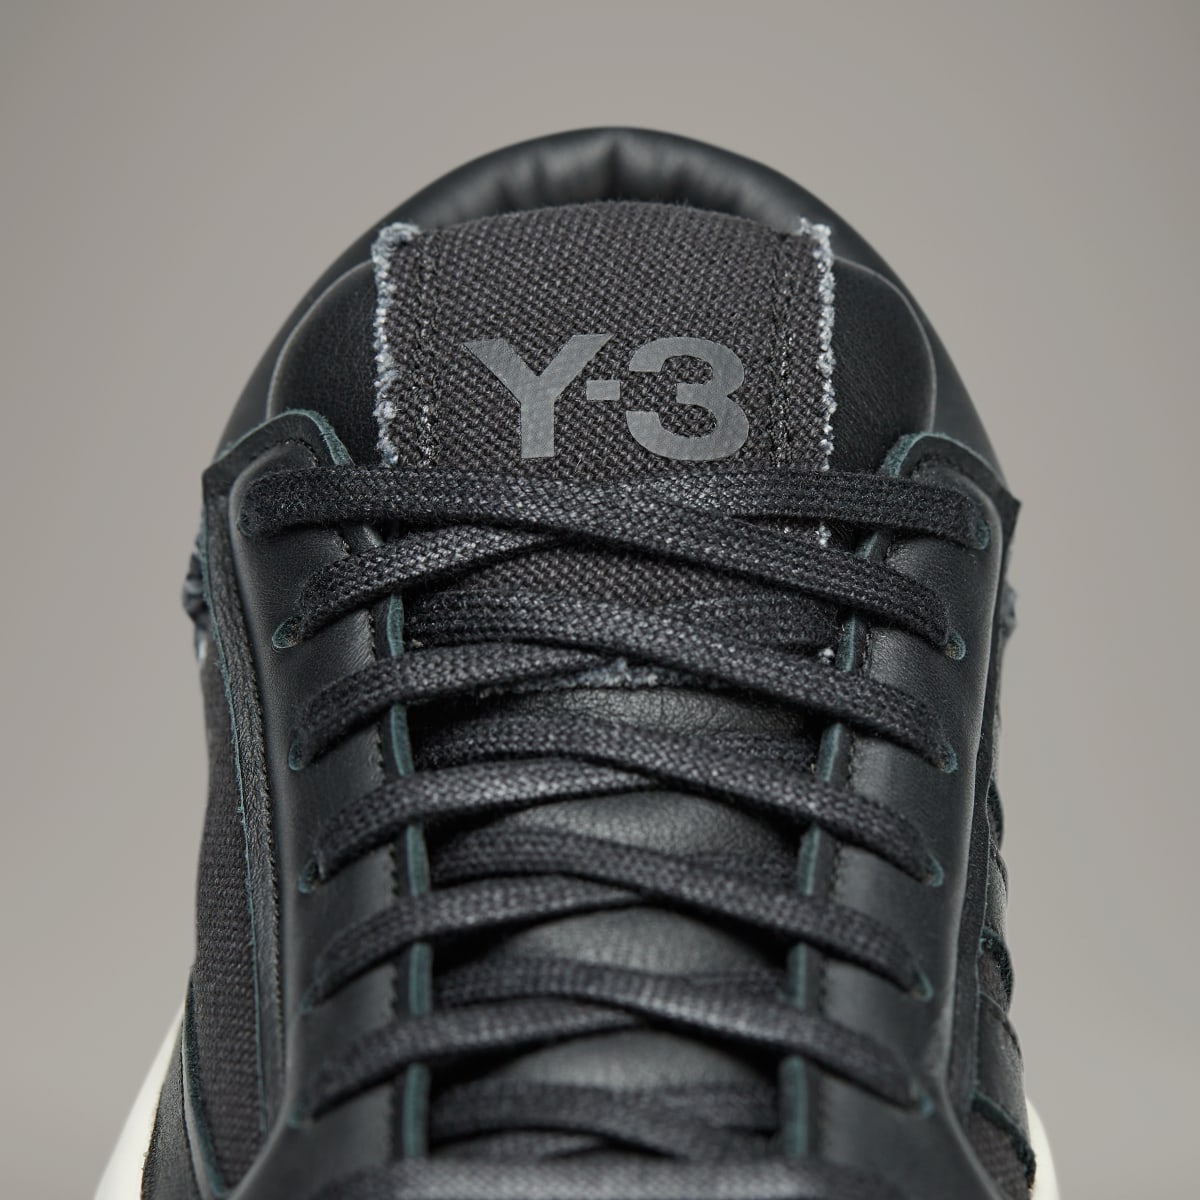 Adidas Y-3 Centennial Low Shoes. 10